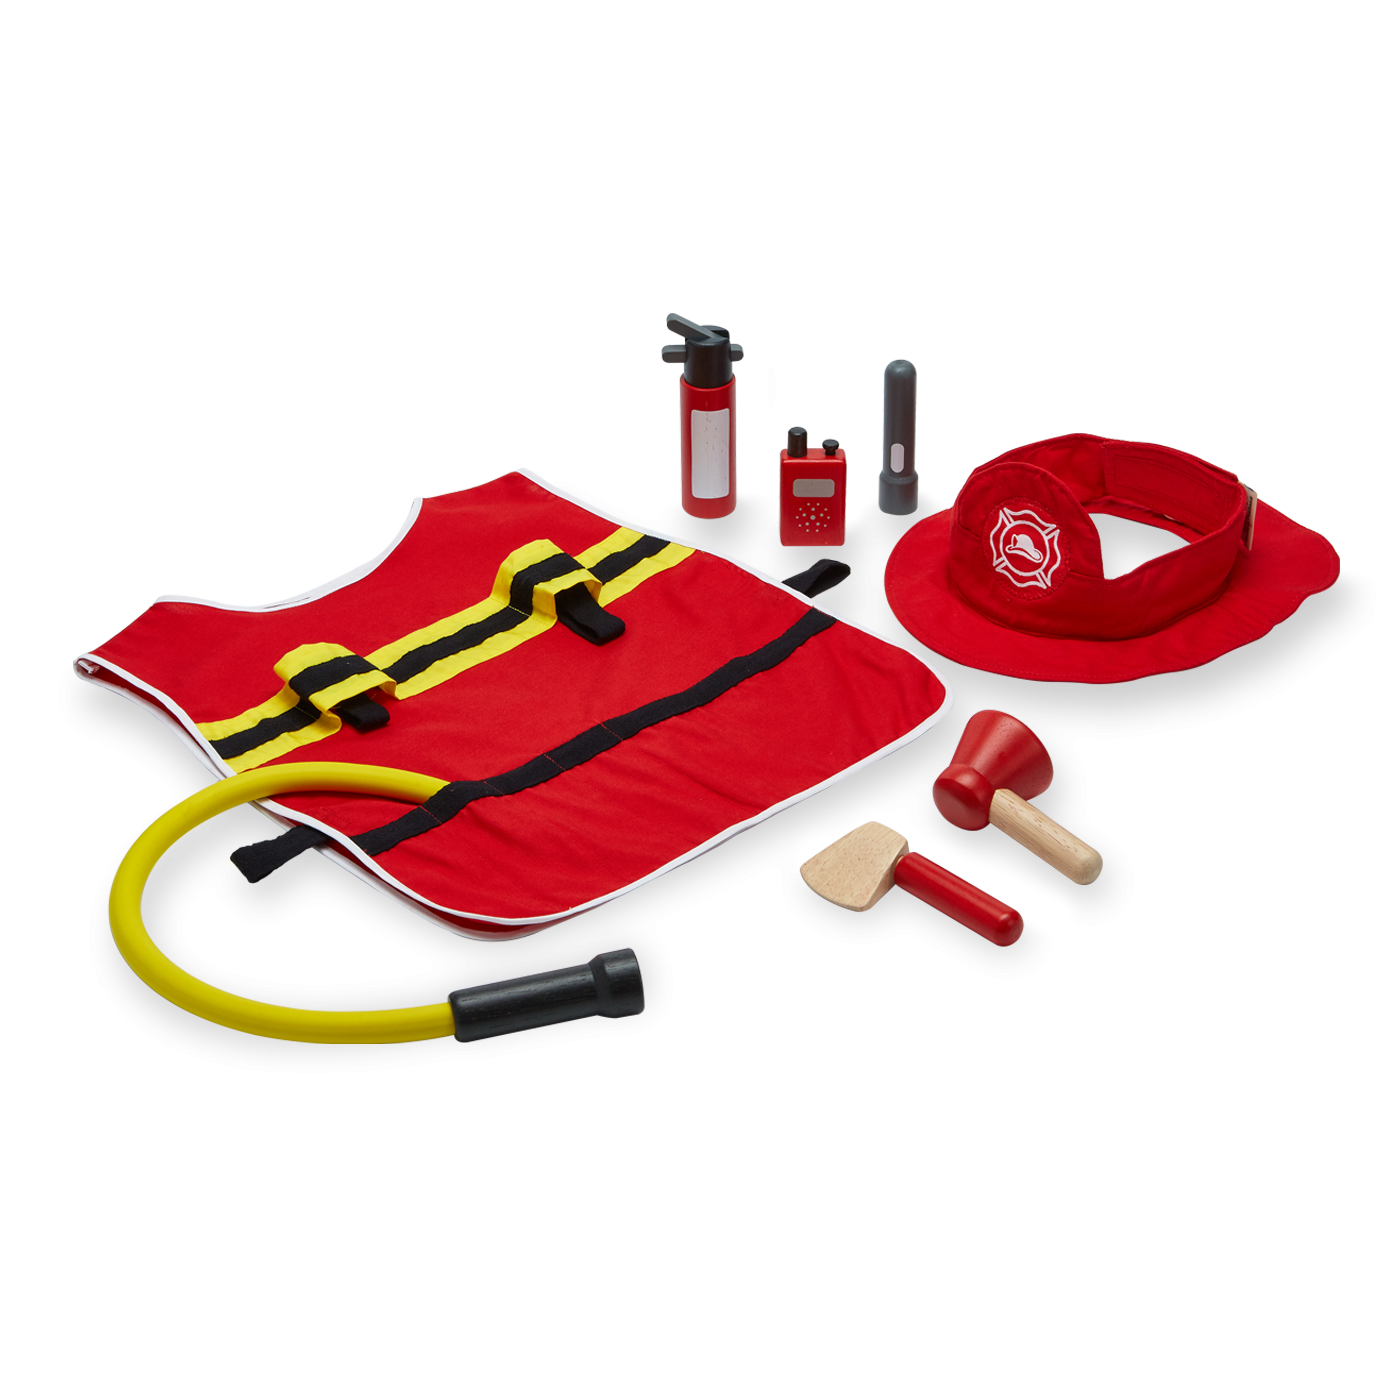 Fire Fighter Play Set by Plan Toys